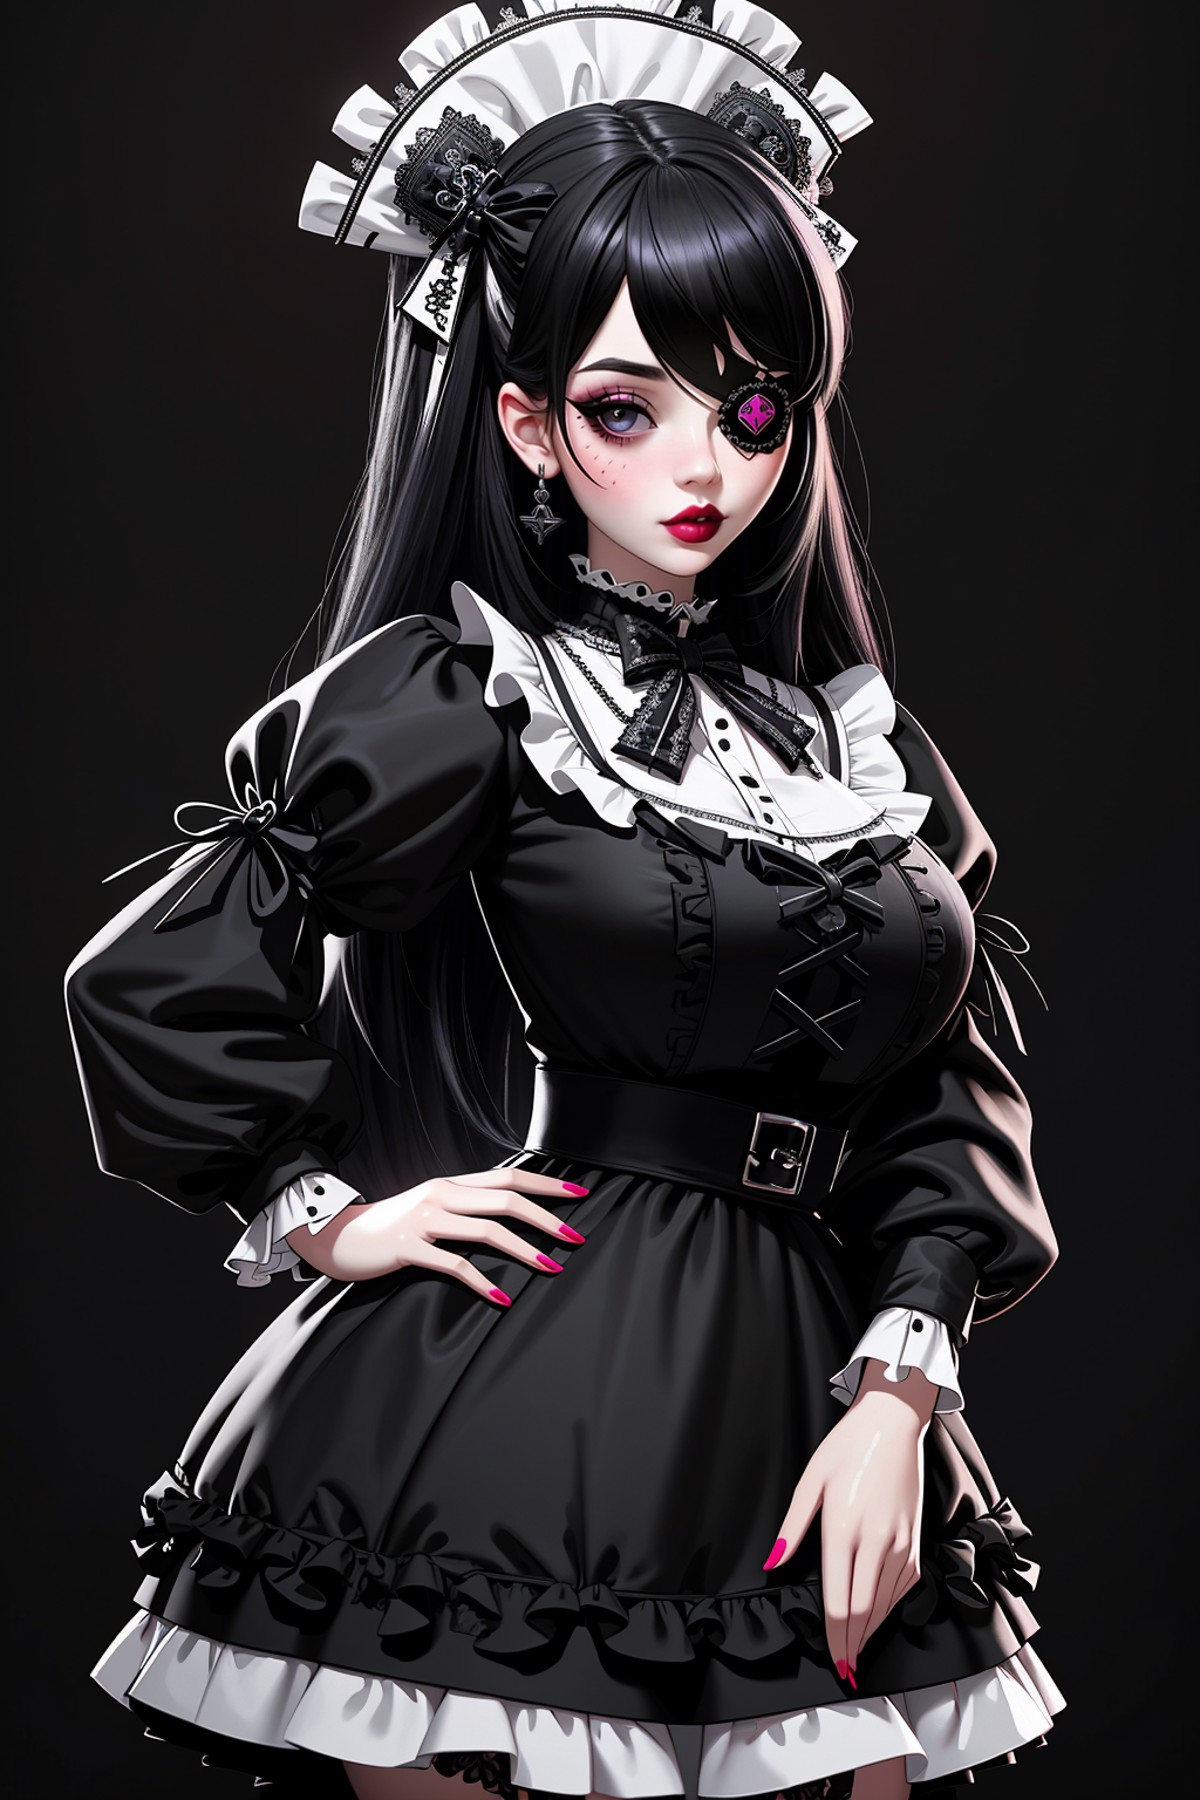 ((Masterpiece, best quality)), edgQuality,bimbo,glossy,(hands on hip)
GothGal, a woman in a black and white dress,ribbon,l...